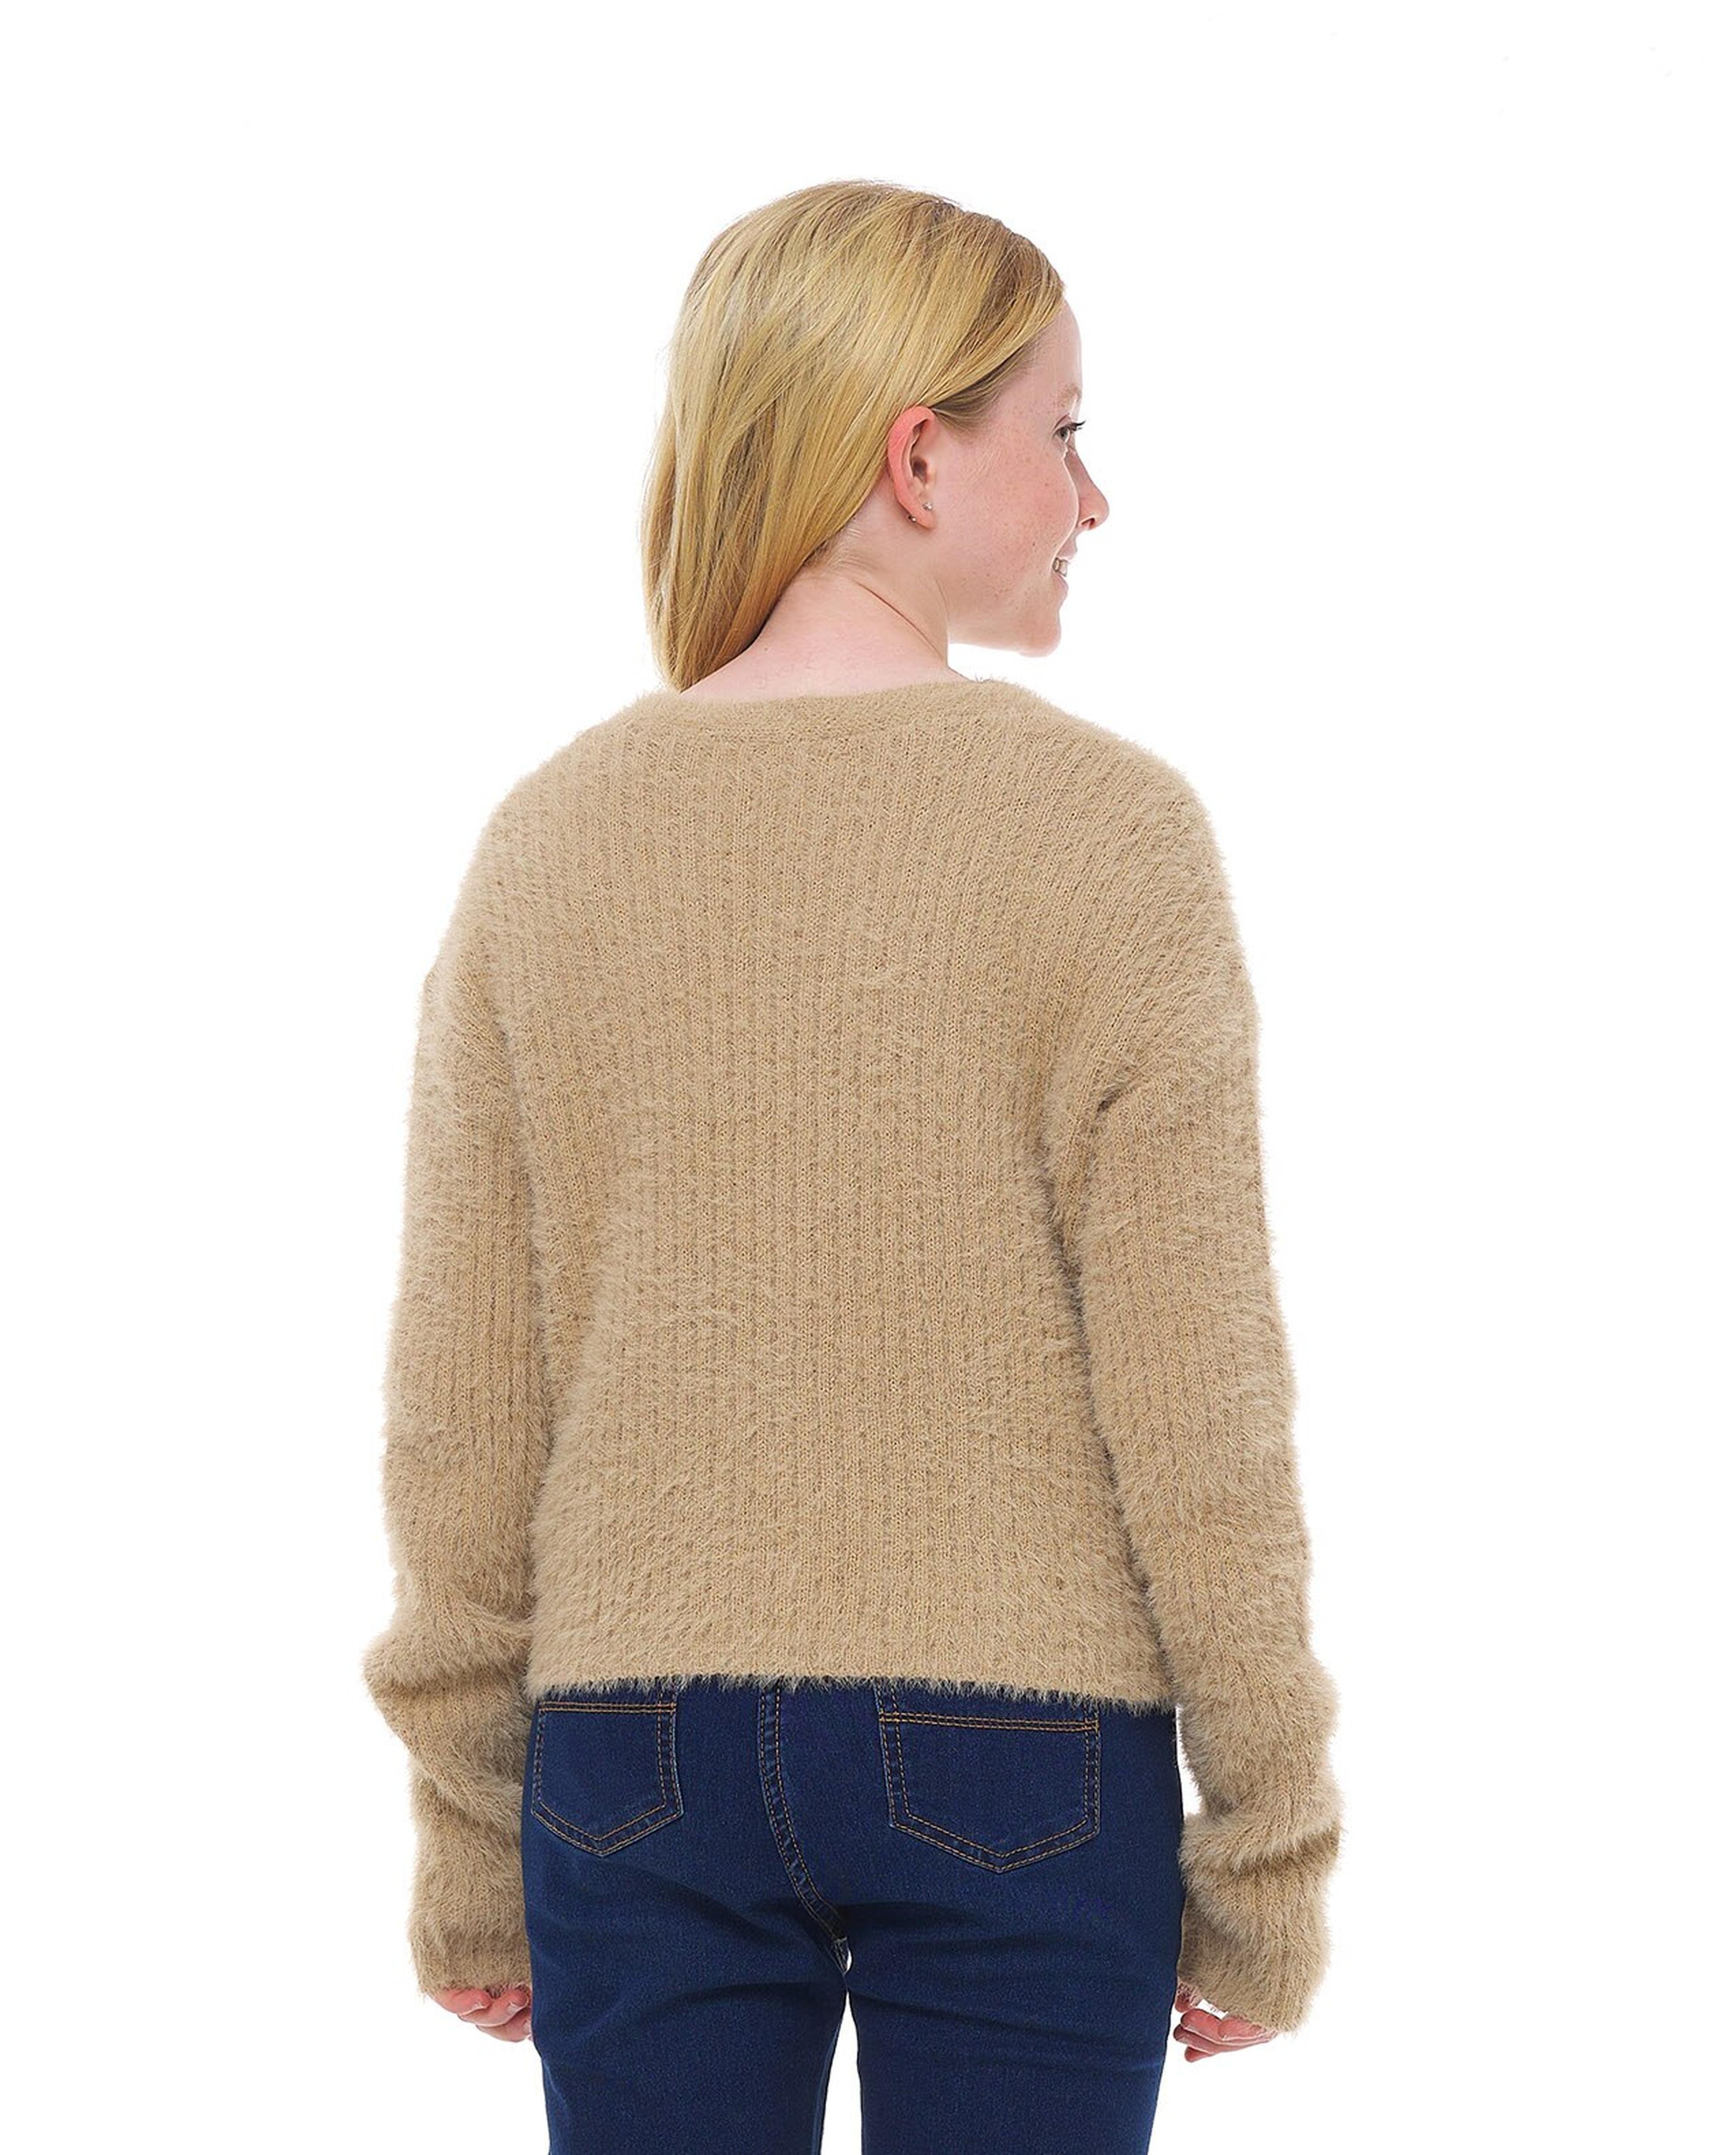 Ribbed Cardigan with Button Closure